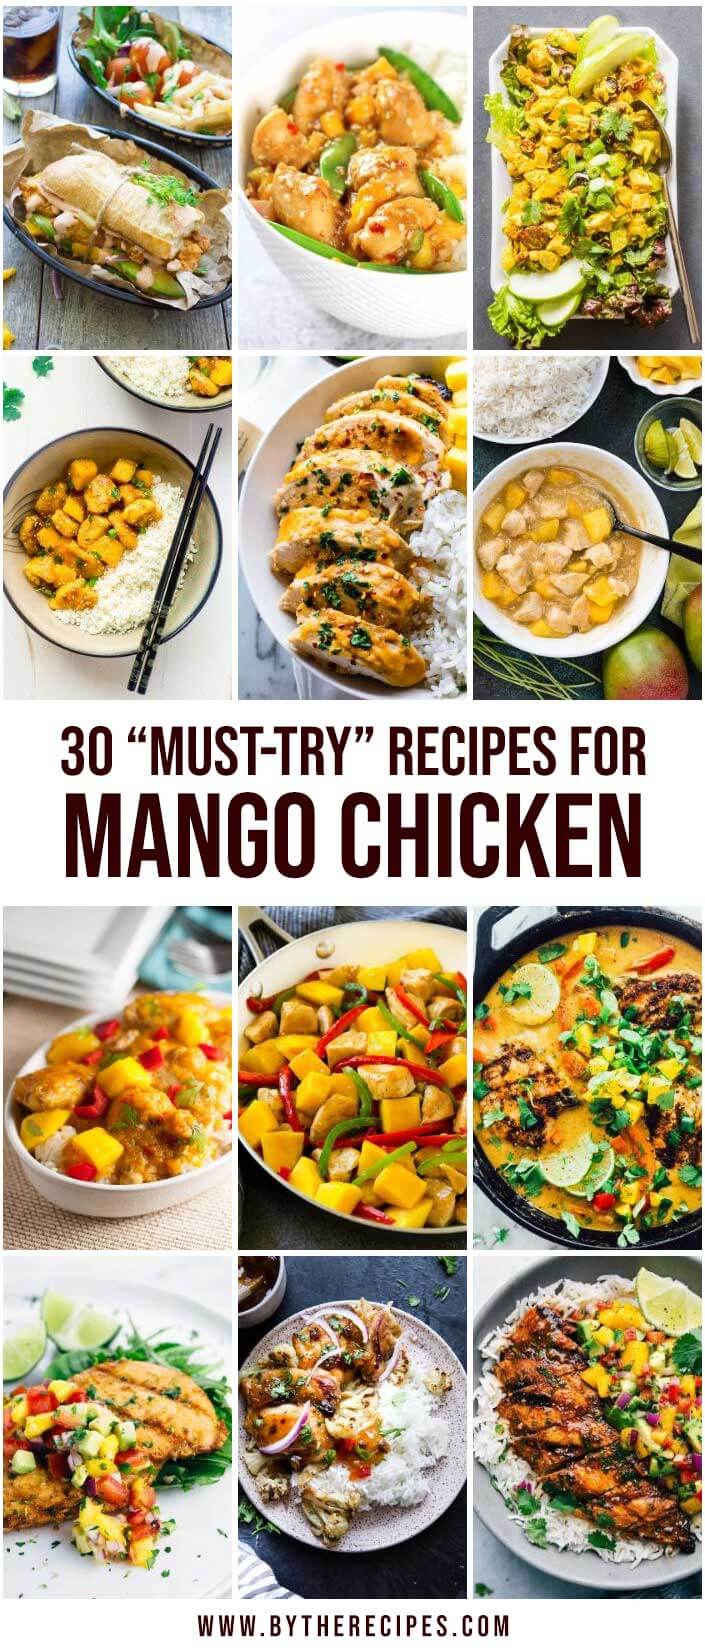 30 “Must-Try” Recipes For Mango Chicken